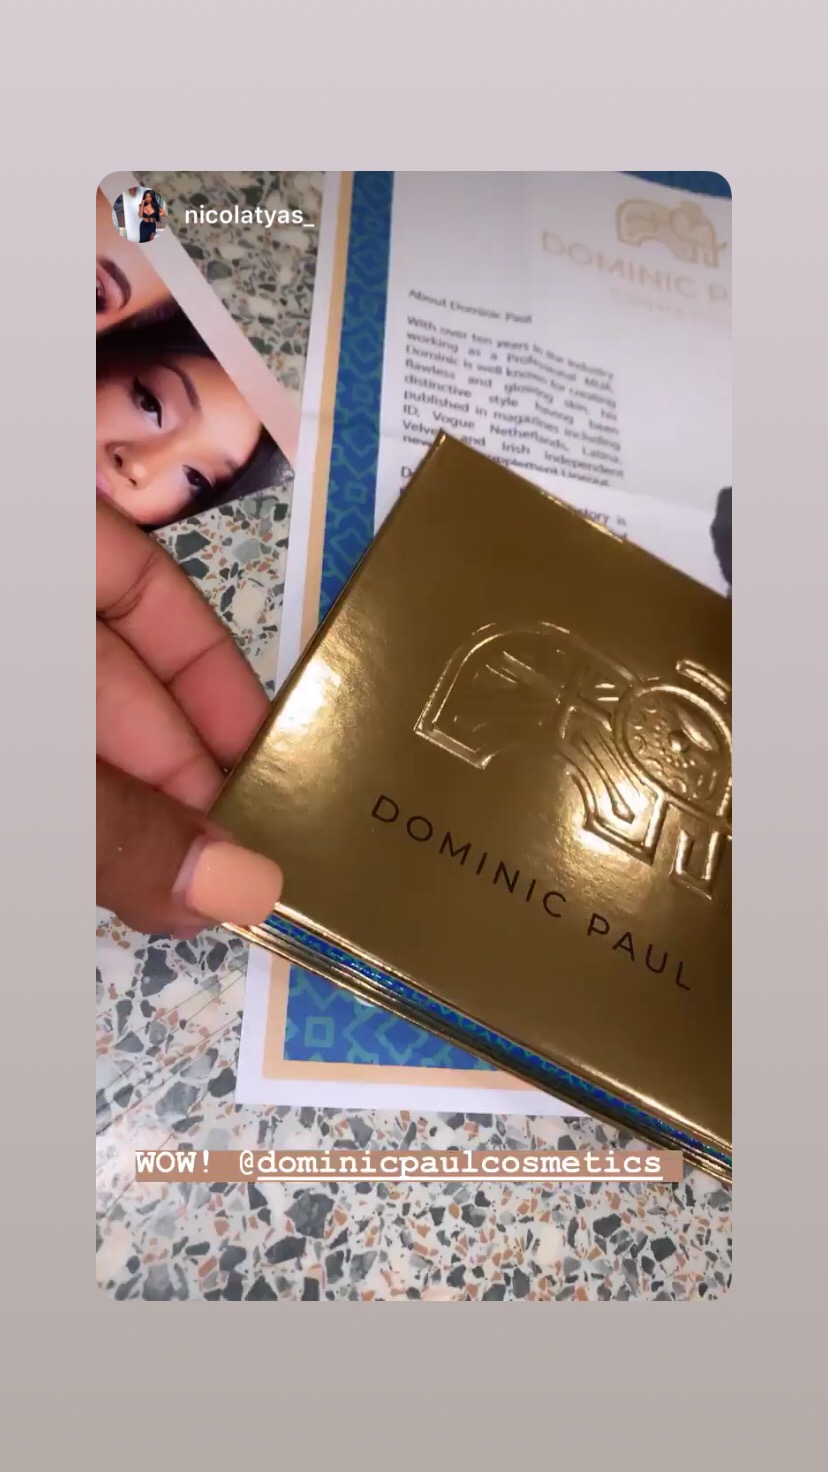 Social media star Nicola Tyas loves her Dominic Paul cosmetics contour palette